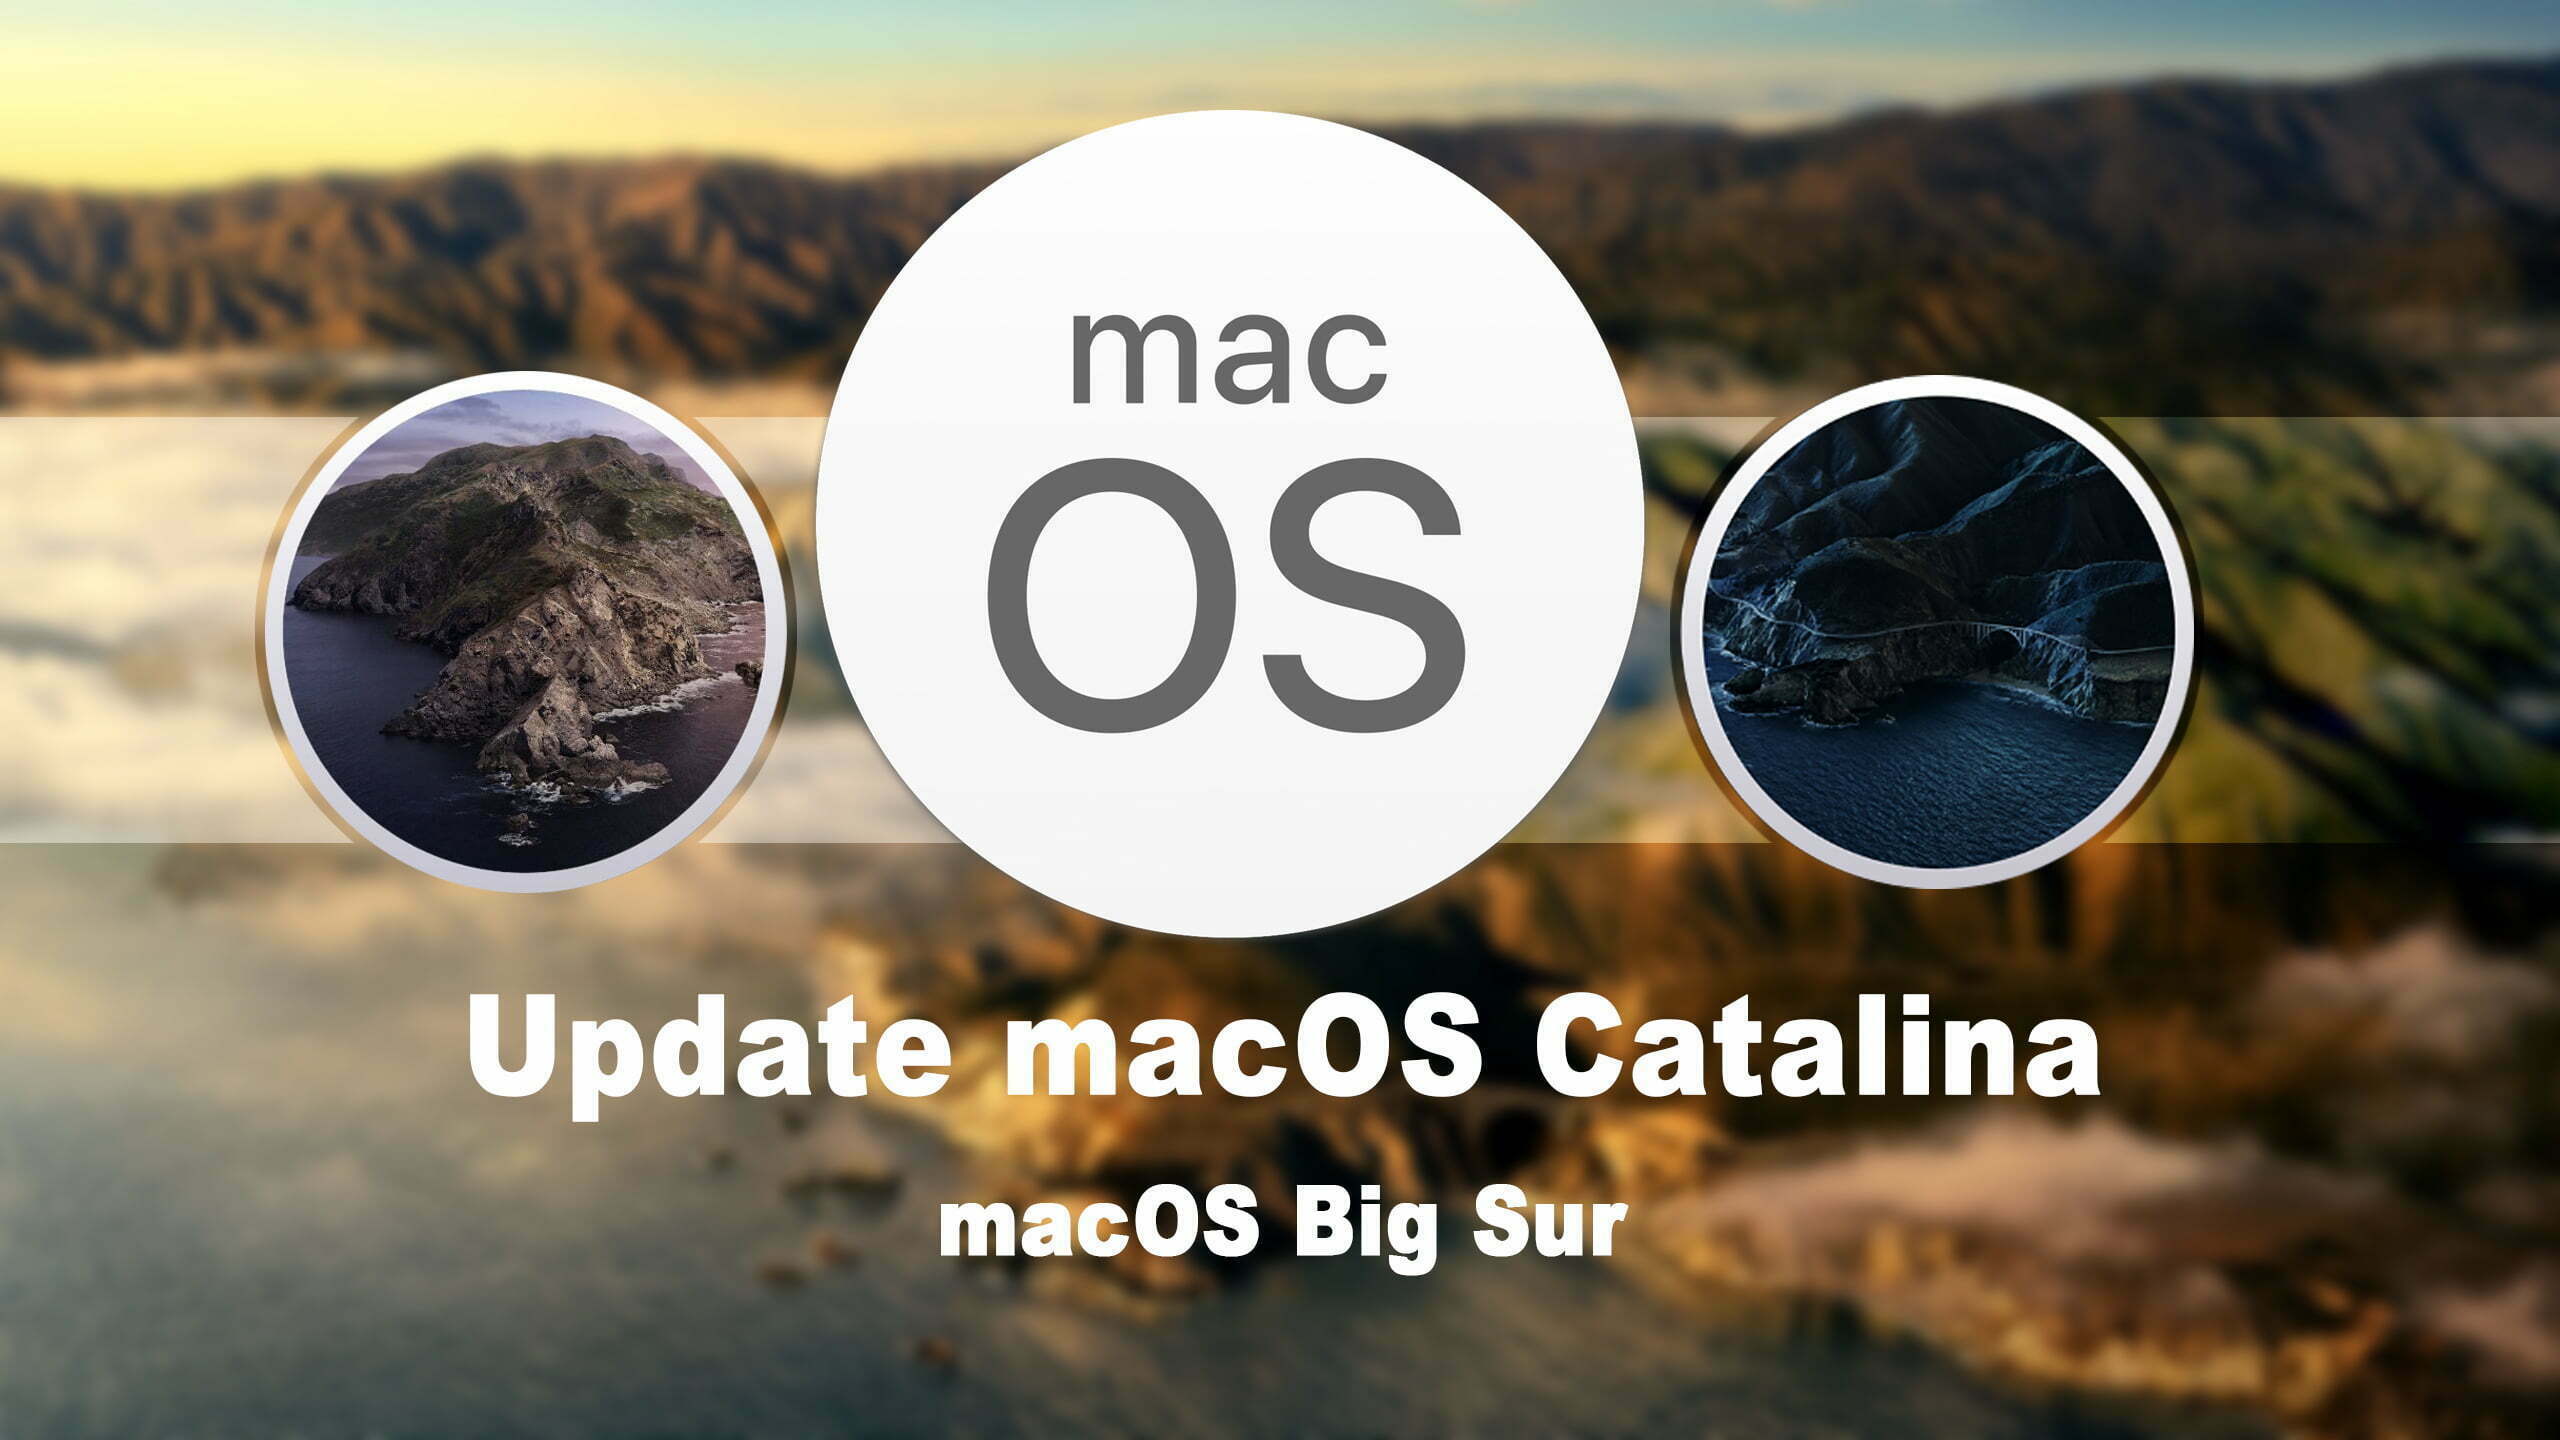 How to Update macOS Catalina to macOS Big Sur on Virtual Machine